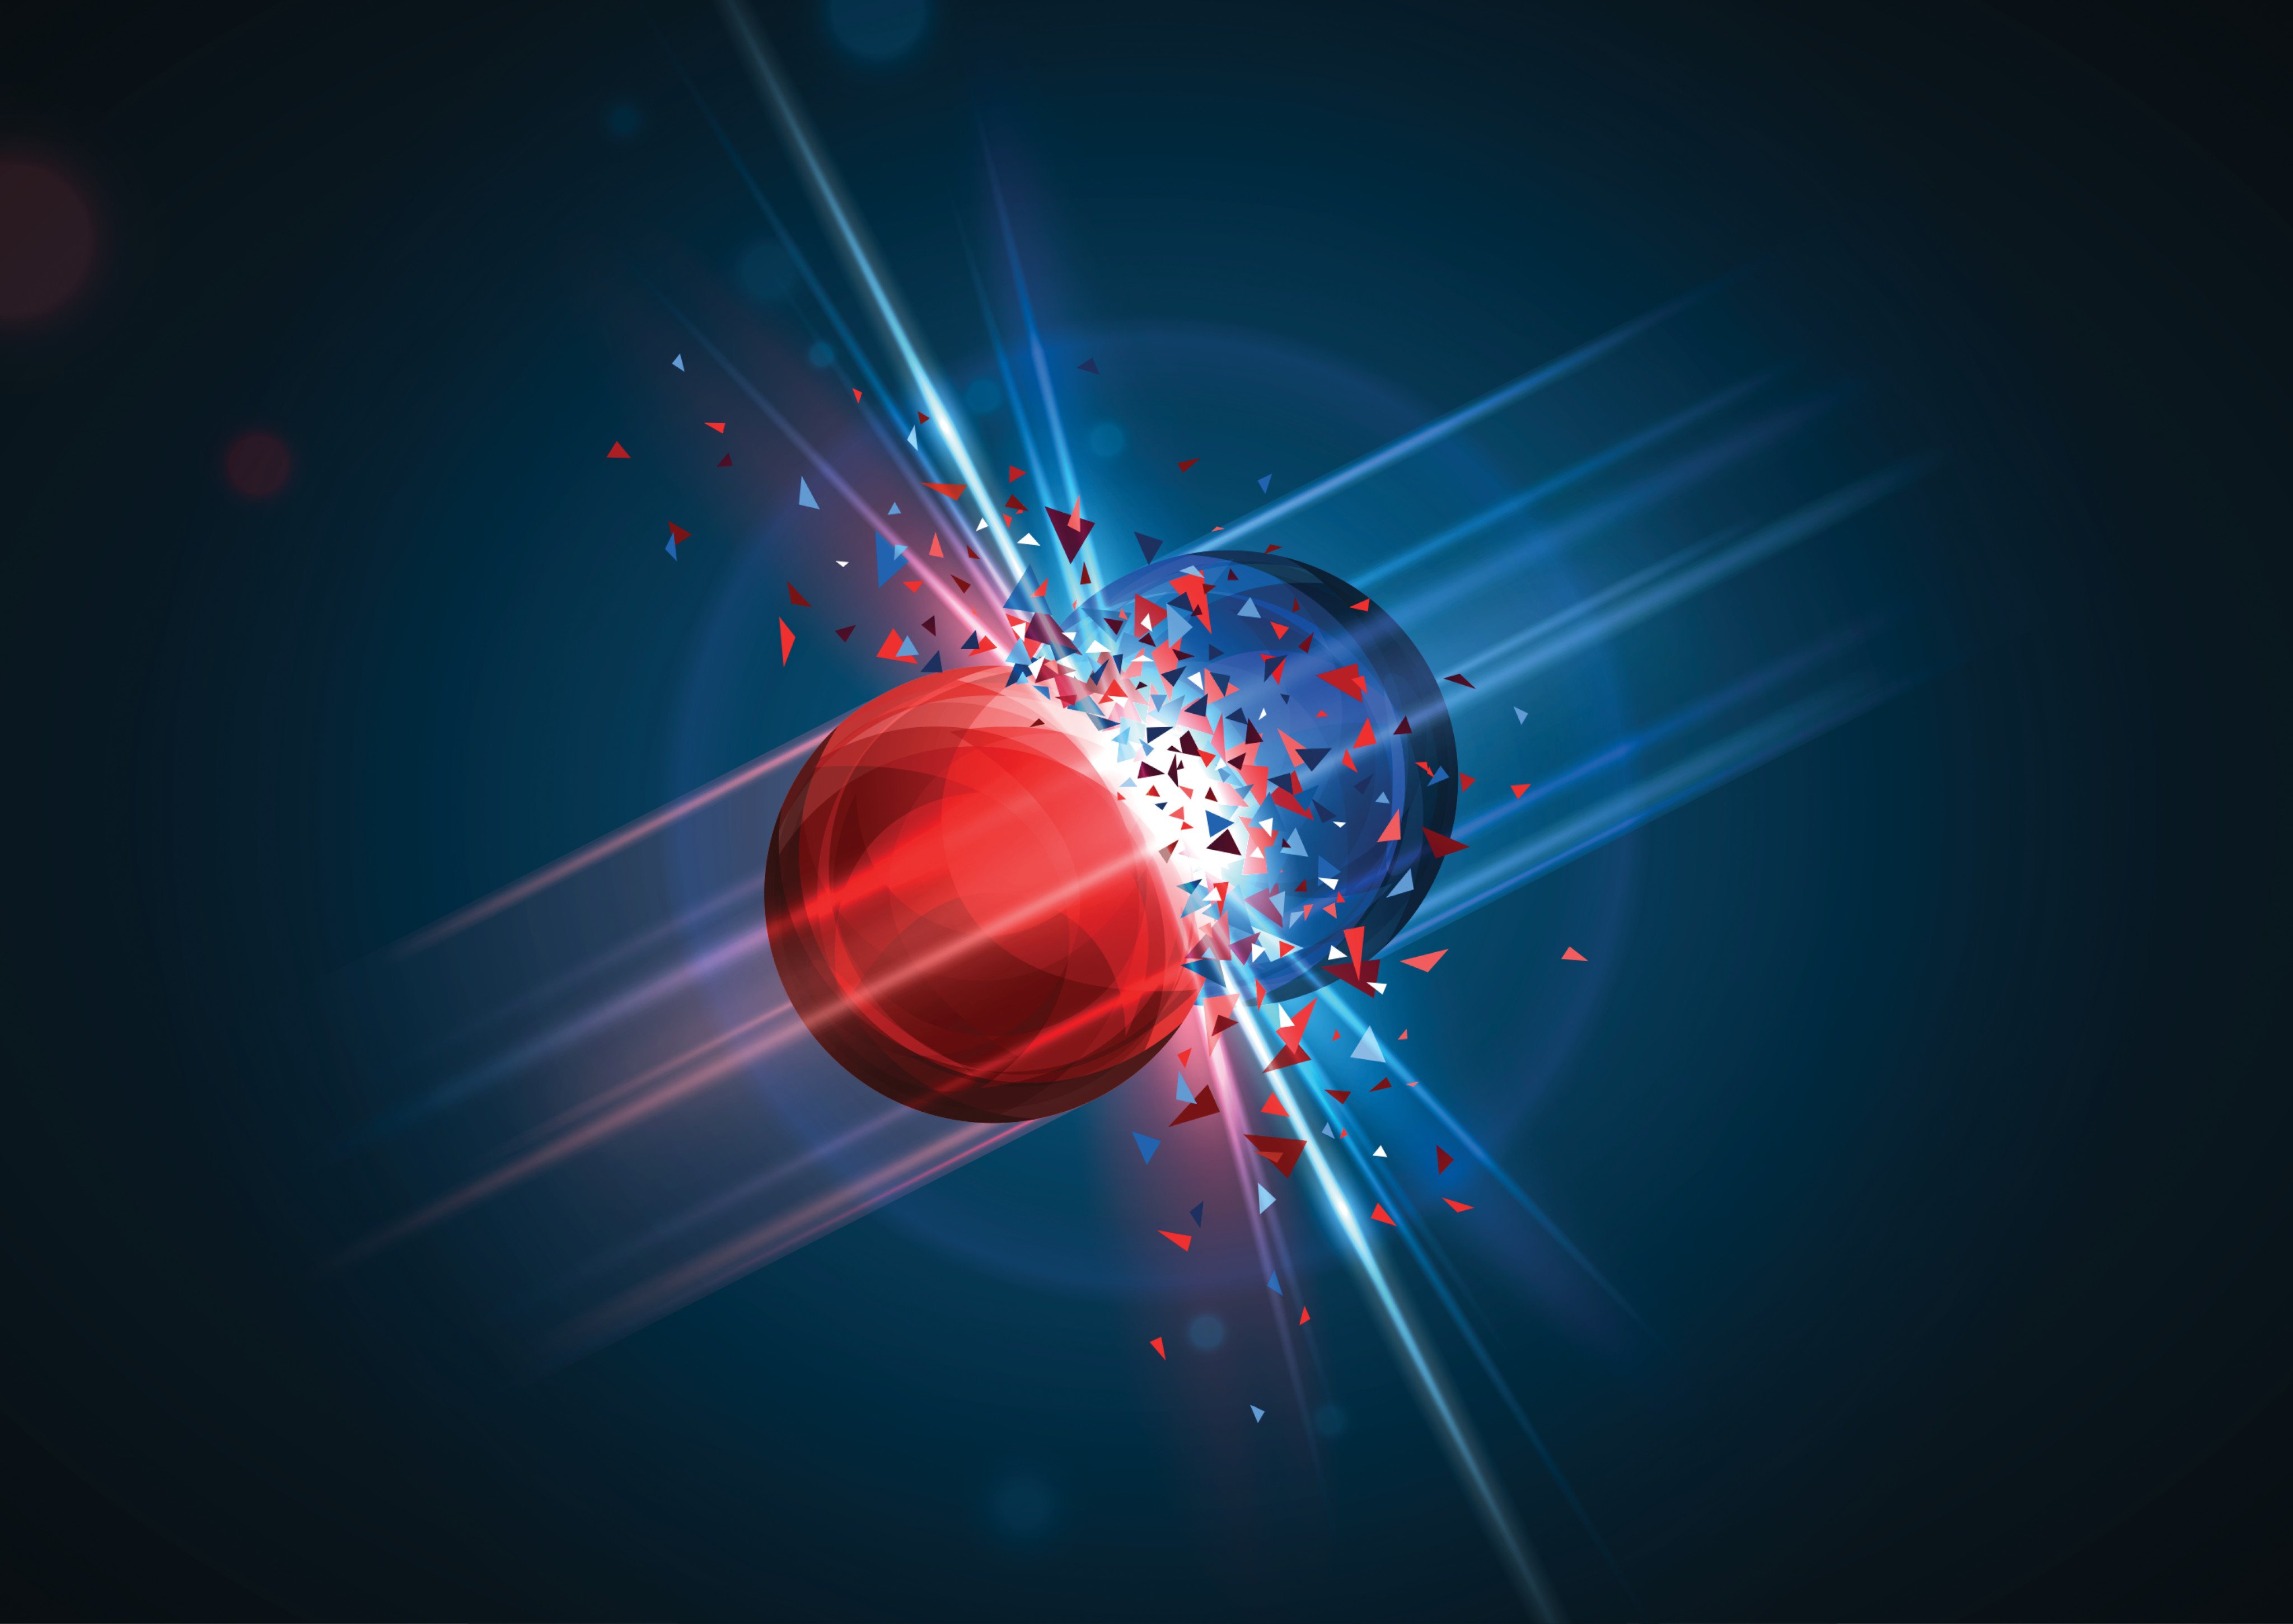 China’s proposed Circular Electron Positron Collider CEPC would create millions of Higgs bosons and allow scientists to make discoveries beyond the Standard Model. Photo: Shutterstock